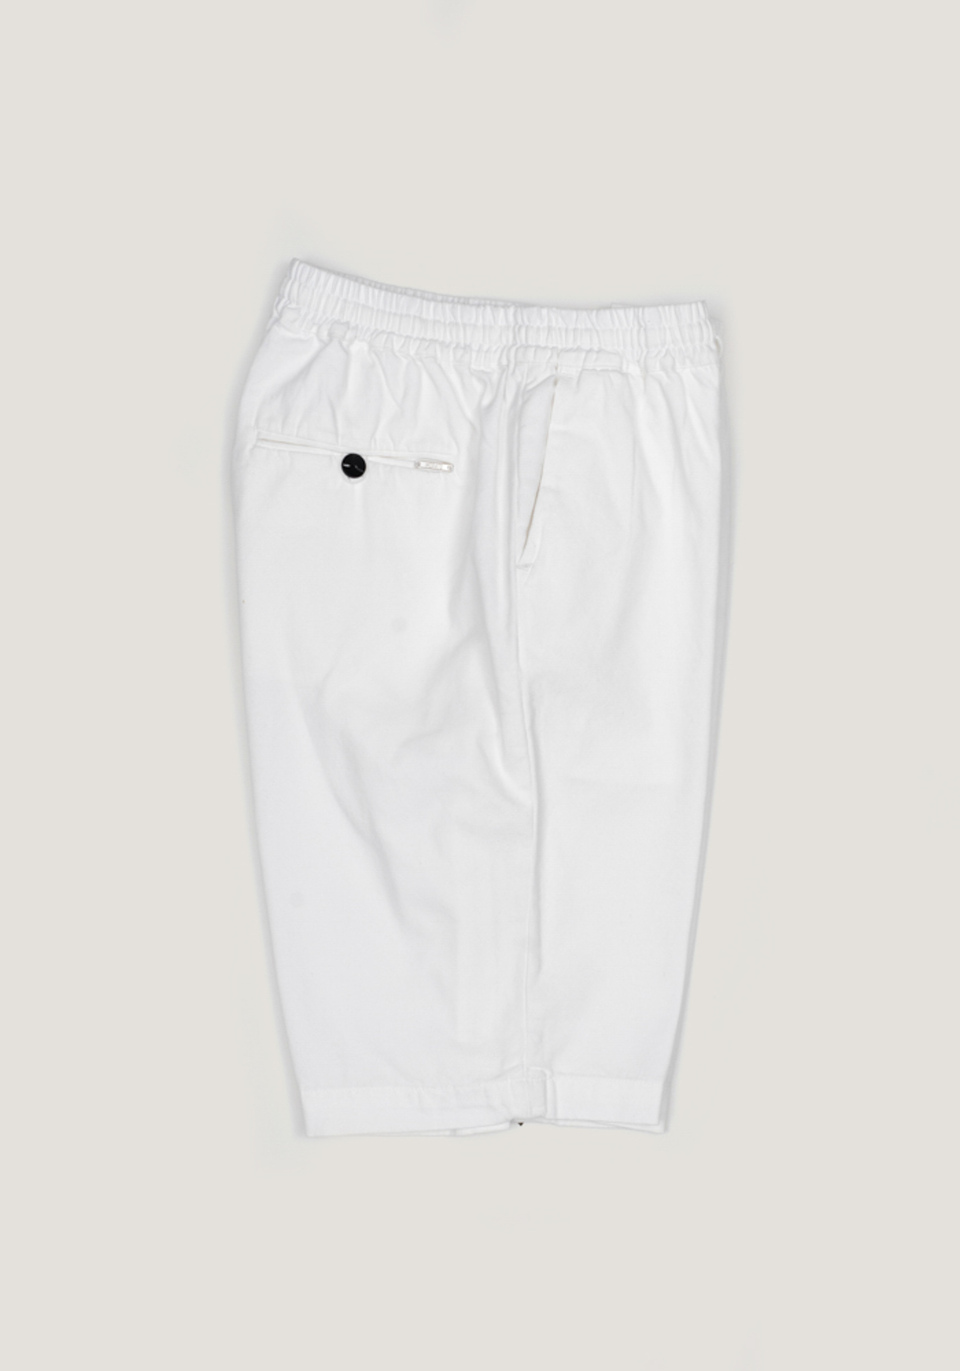 CARROT-FIT SHORTS IN 100% COTTON CANVAS WITH AN ELASTICATED DRAWSTRING WAIST - Antony Morato Online Shop